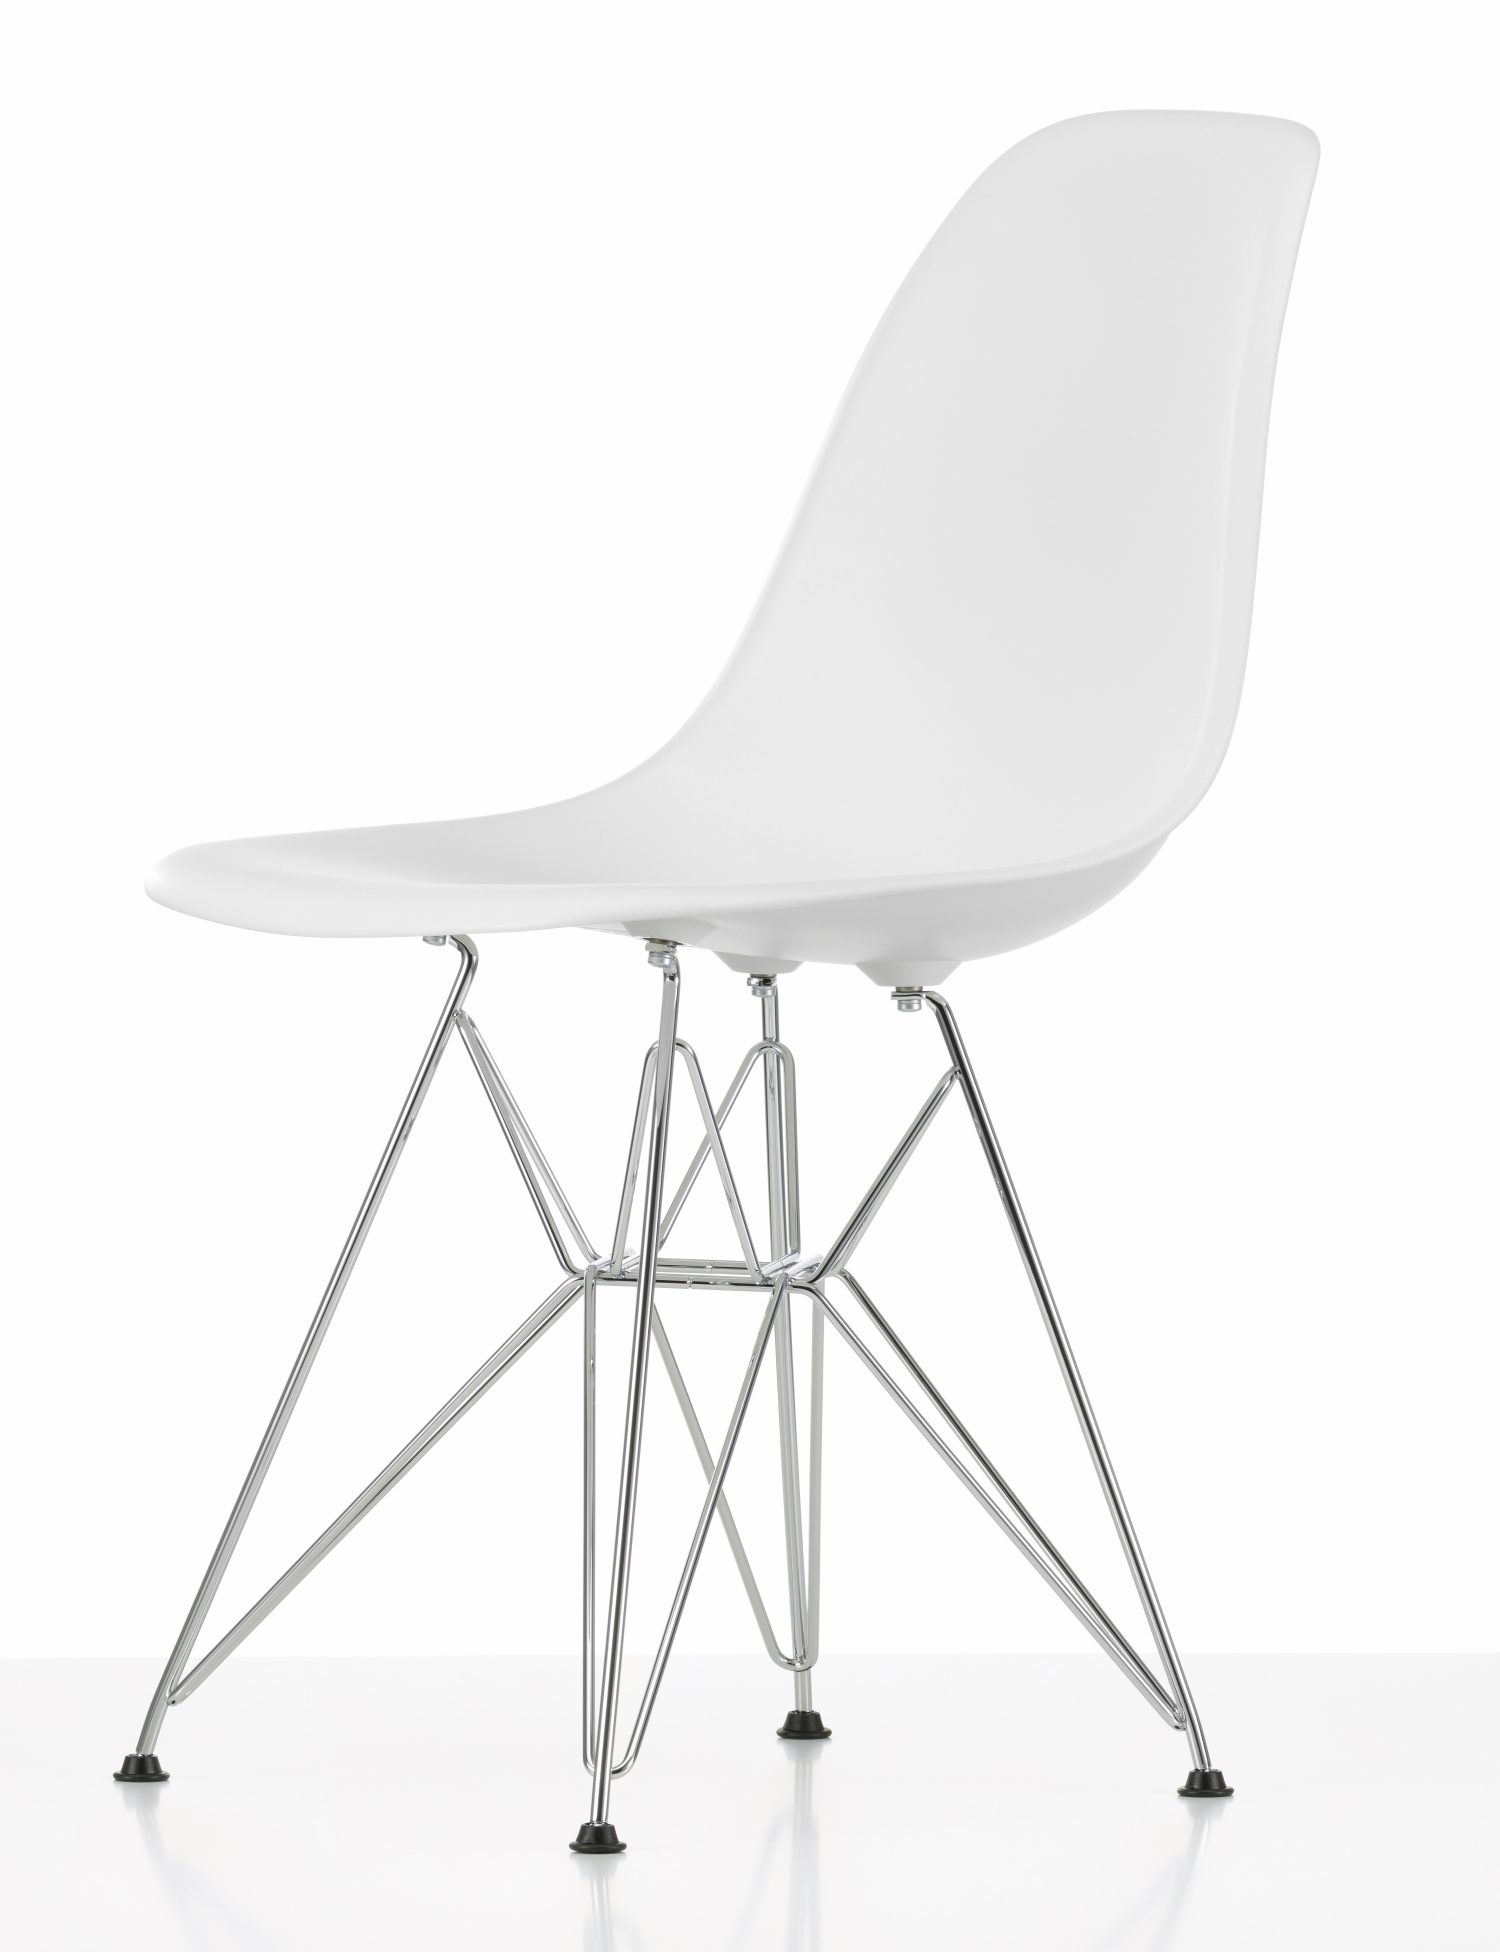 vitra-Eames-dsr-Plastic Side-Chair-re